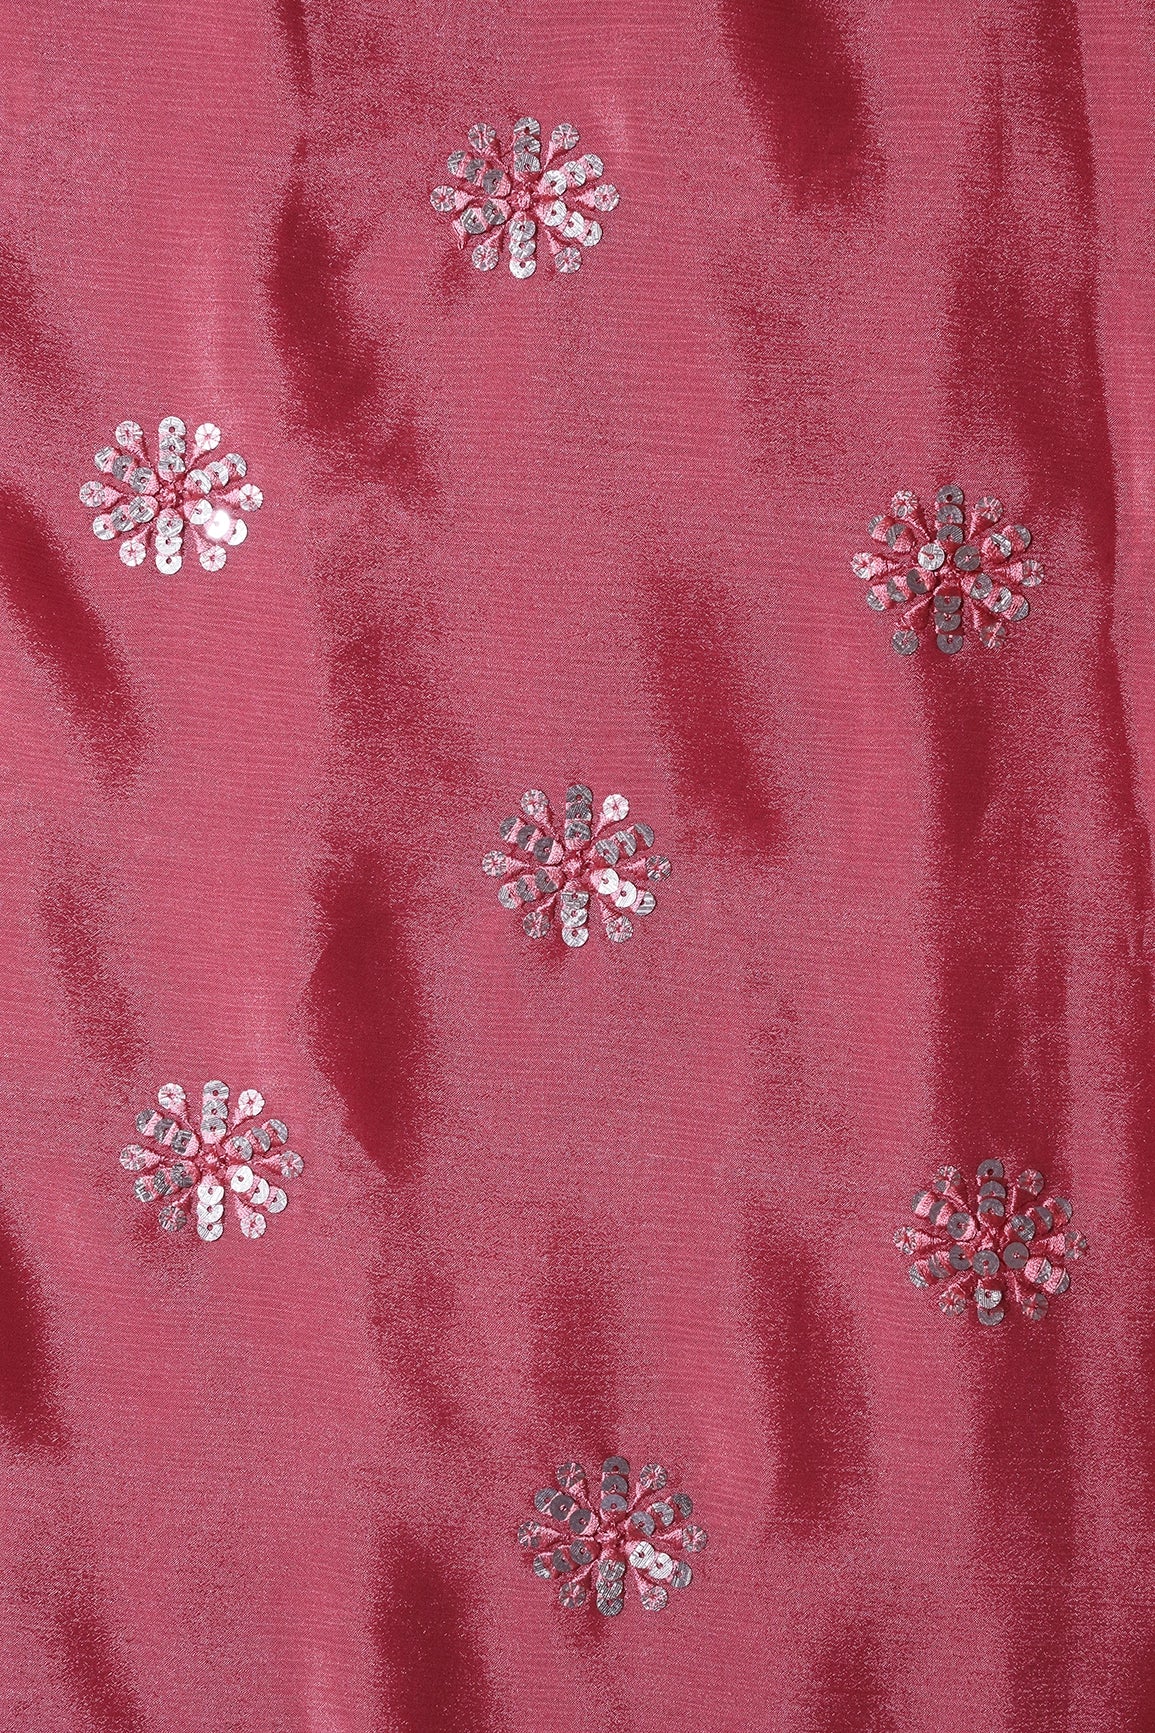 Pink Thread With Gold Sequins Floral Butta Embroidery Work On Gajri Pink Chinnon Chiffon Fabric